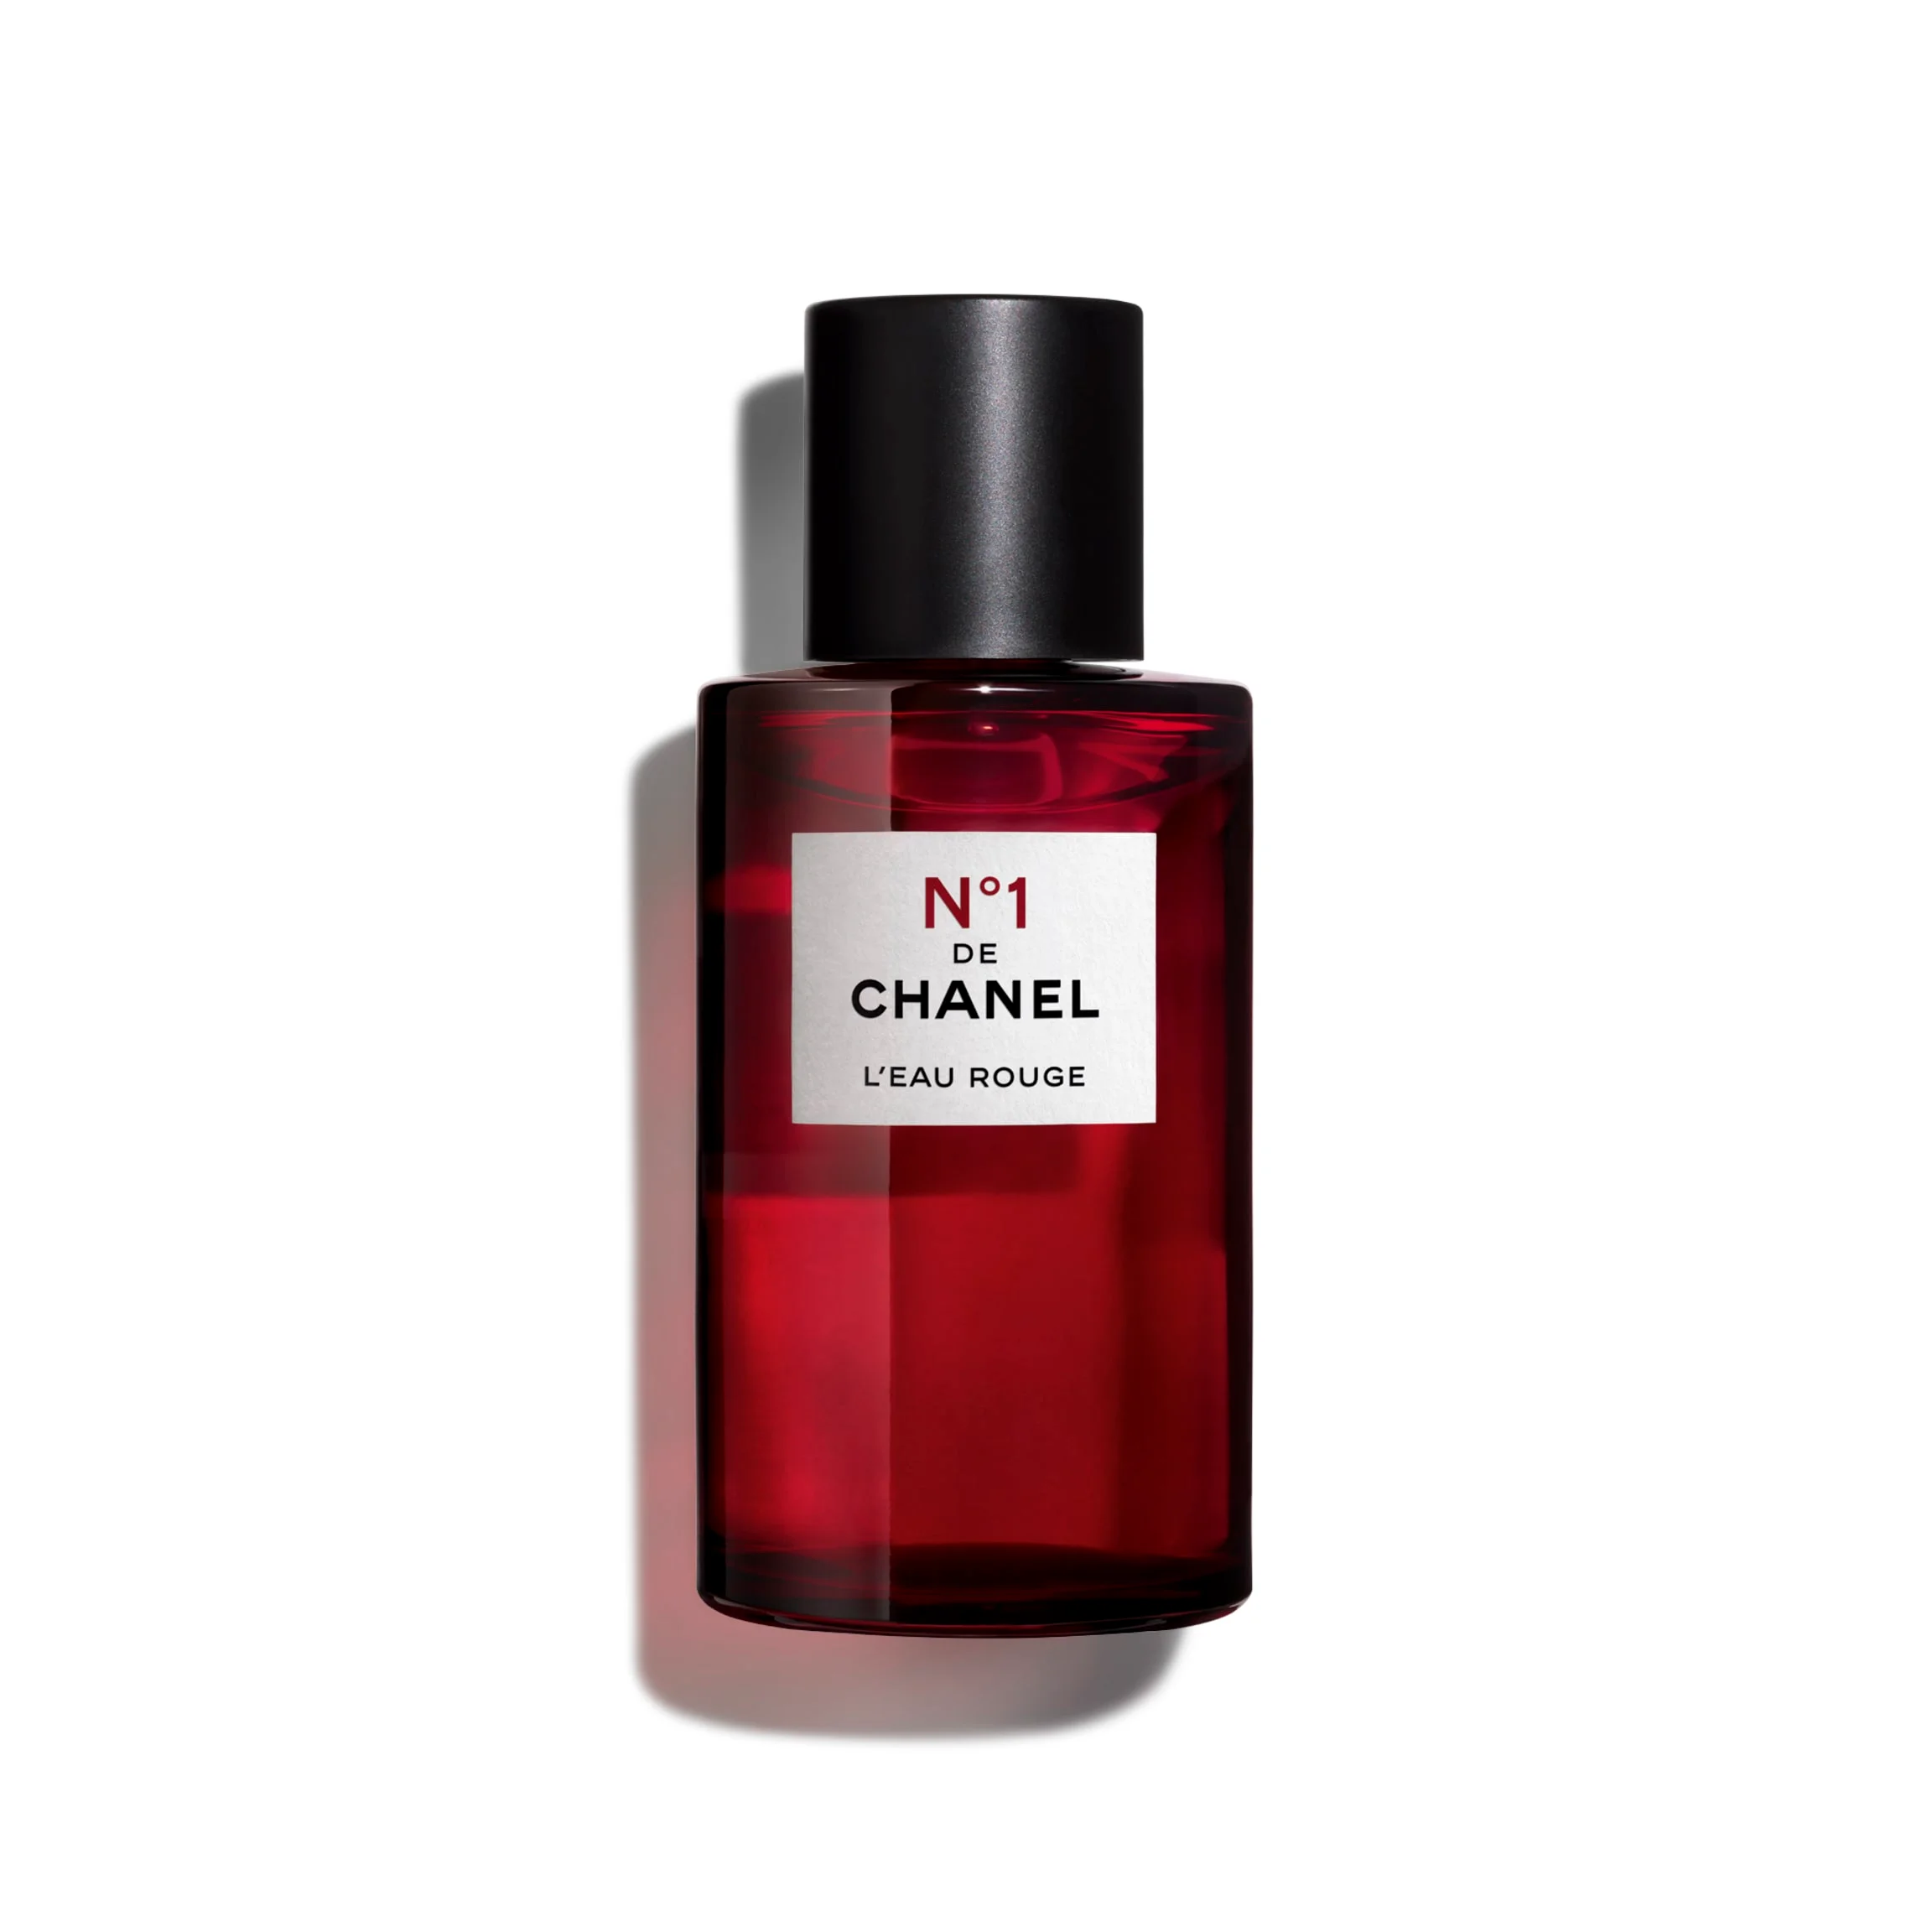 notes of chanel no 5